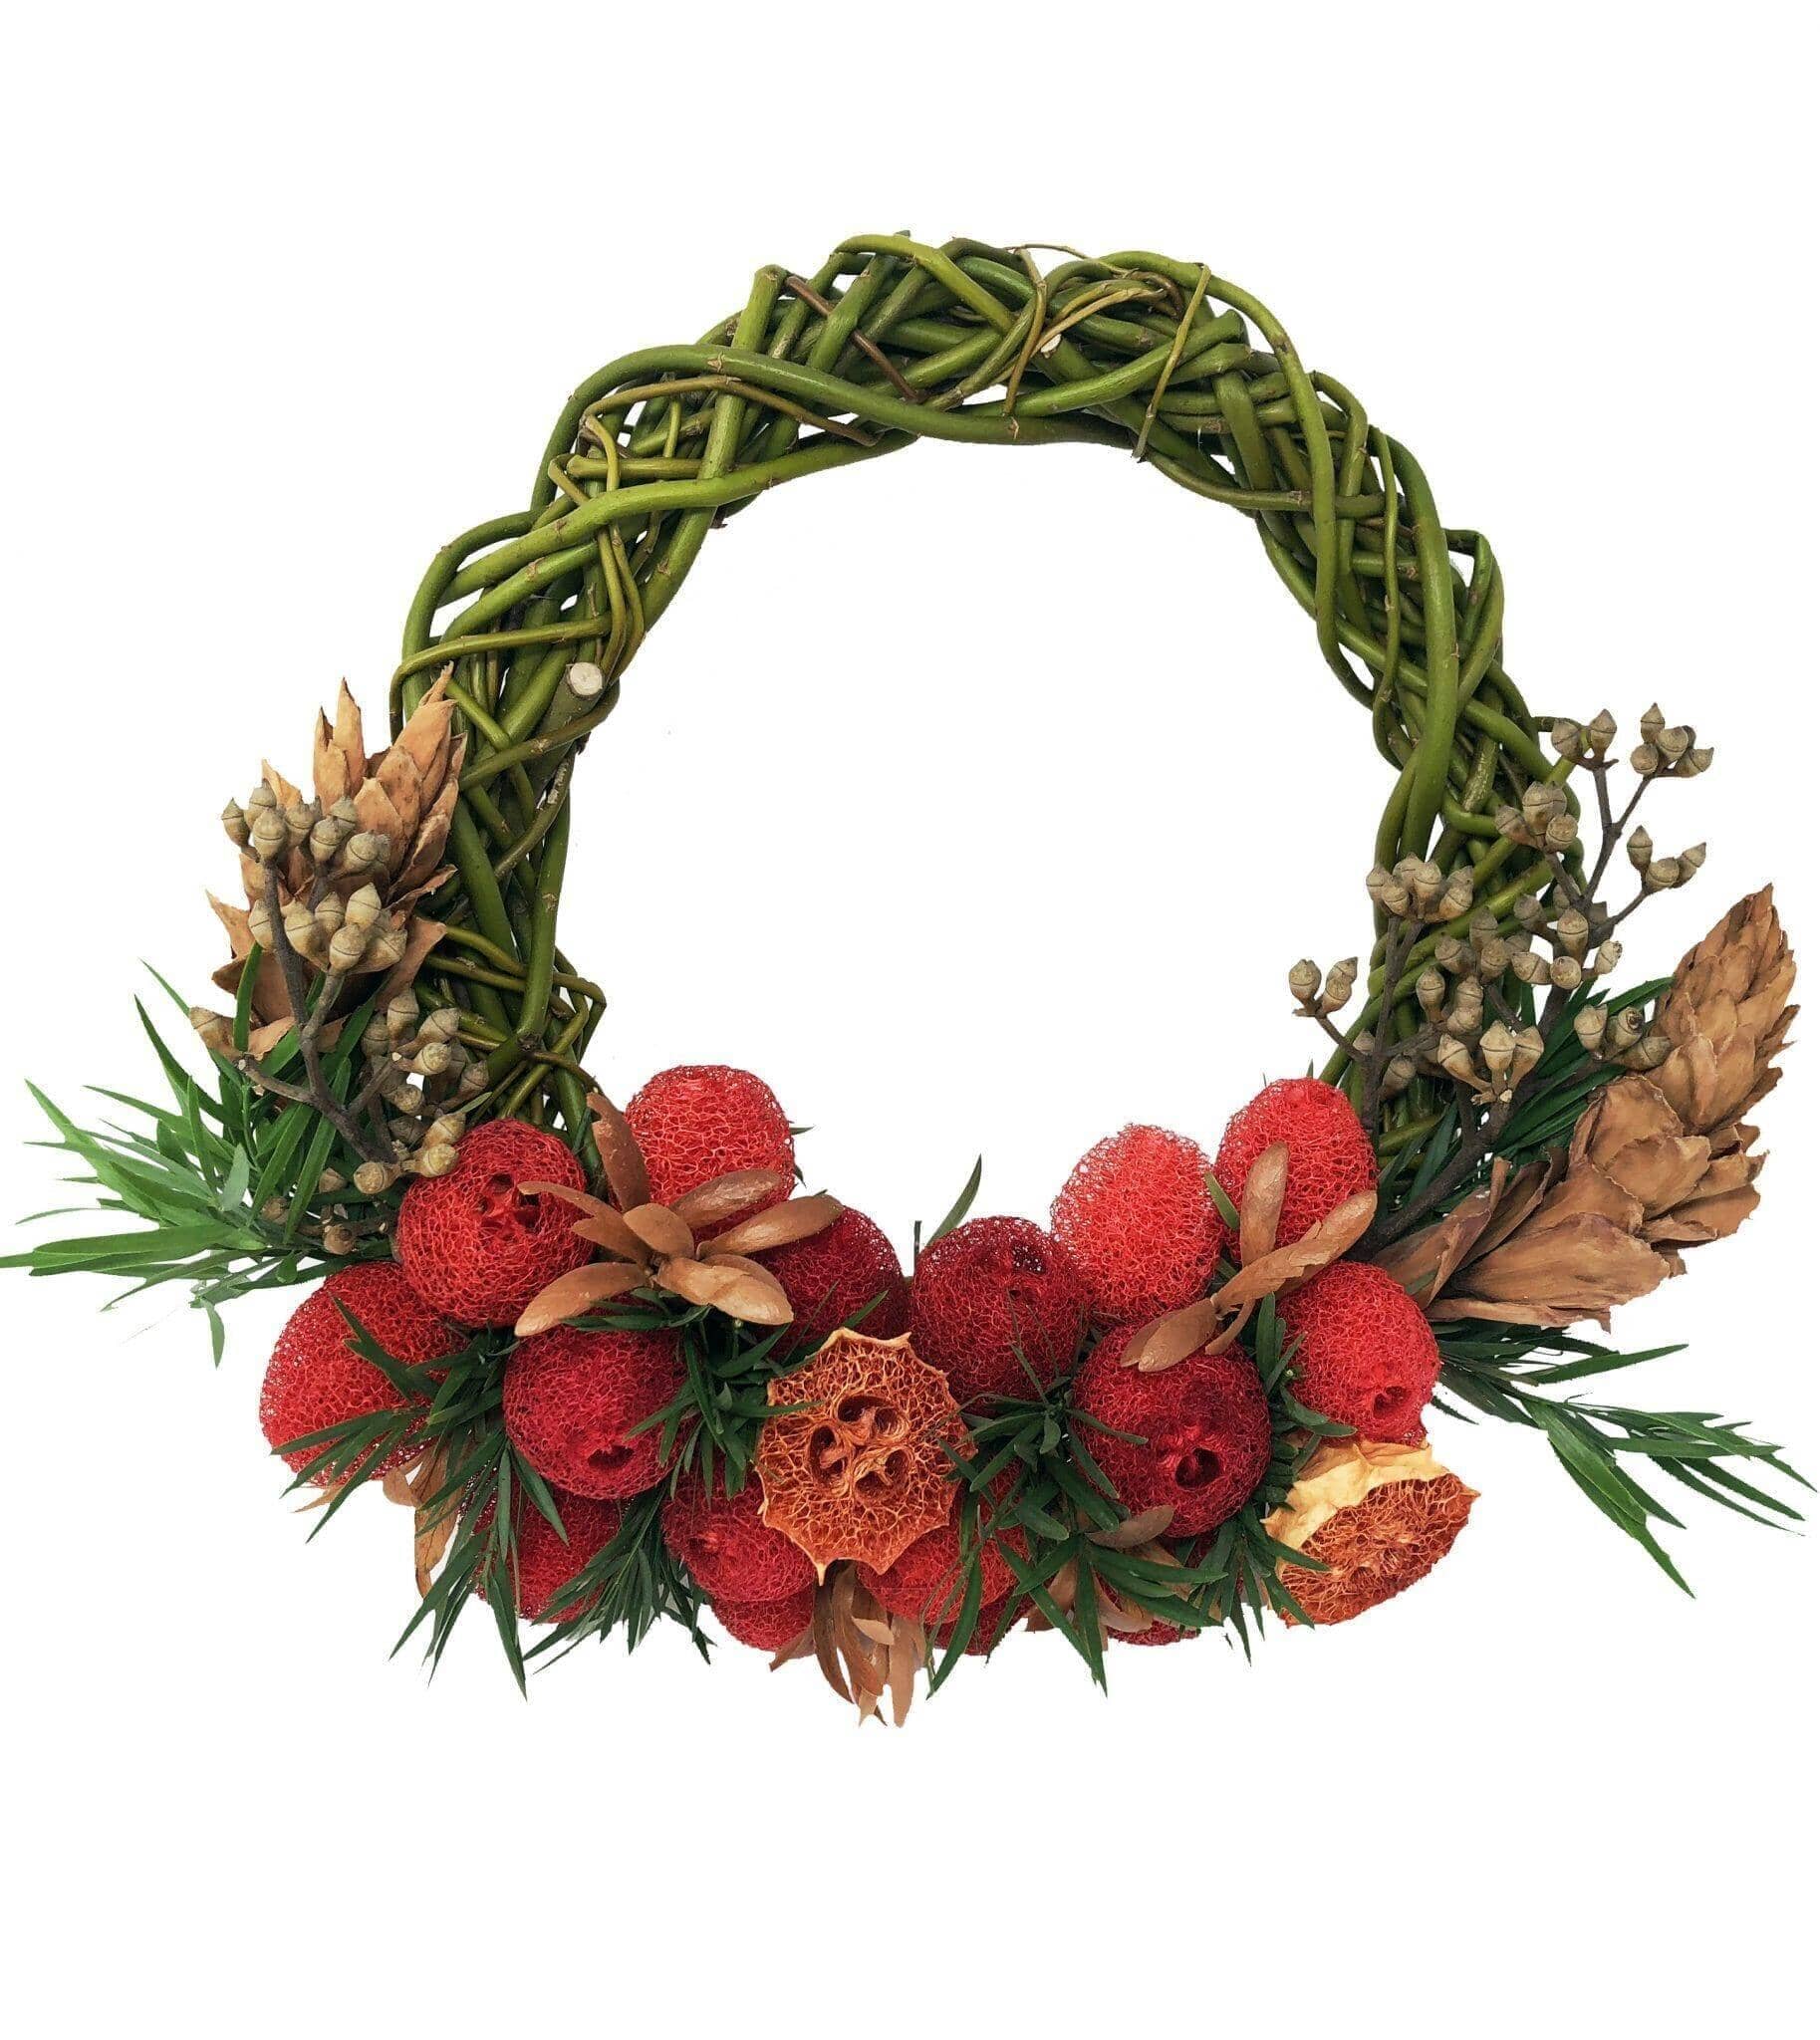 Exquisite Christmas Wreaths